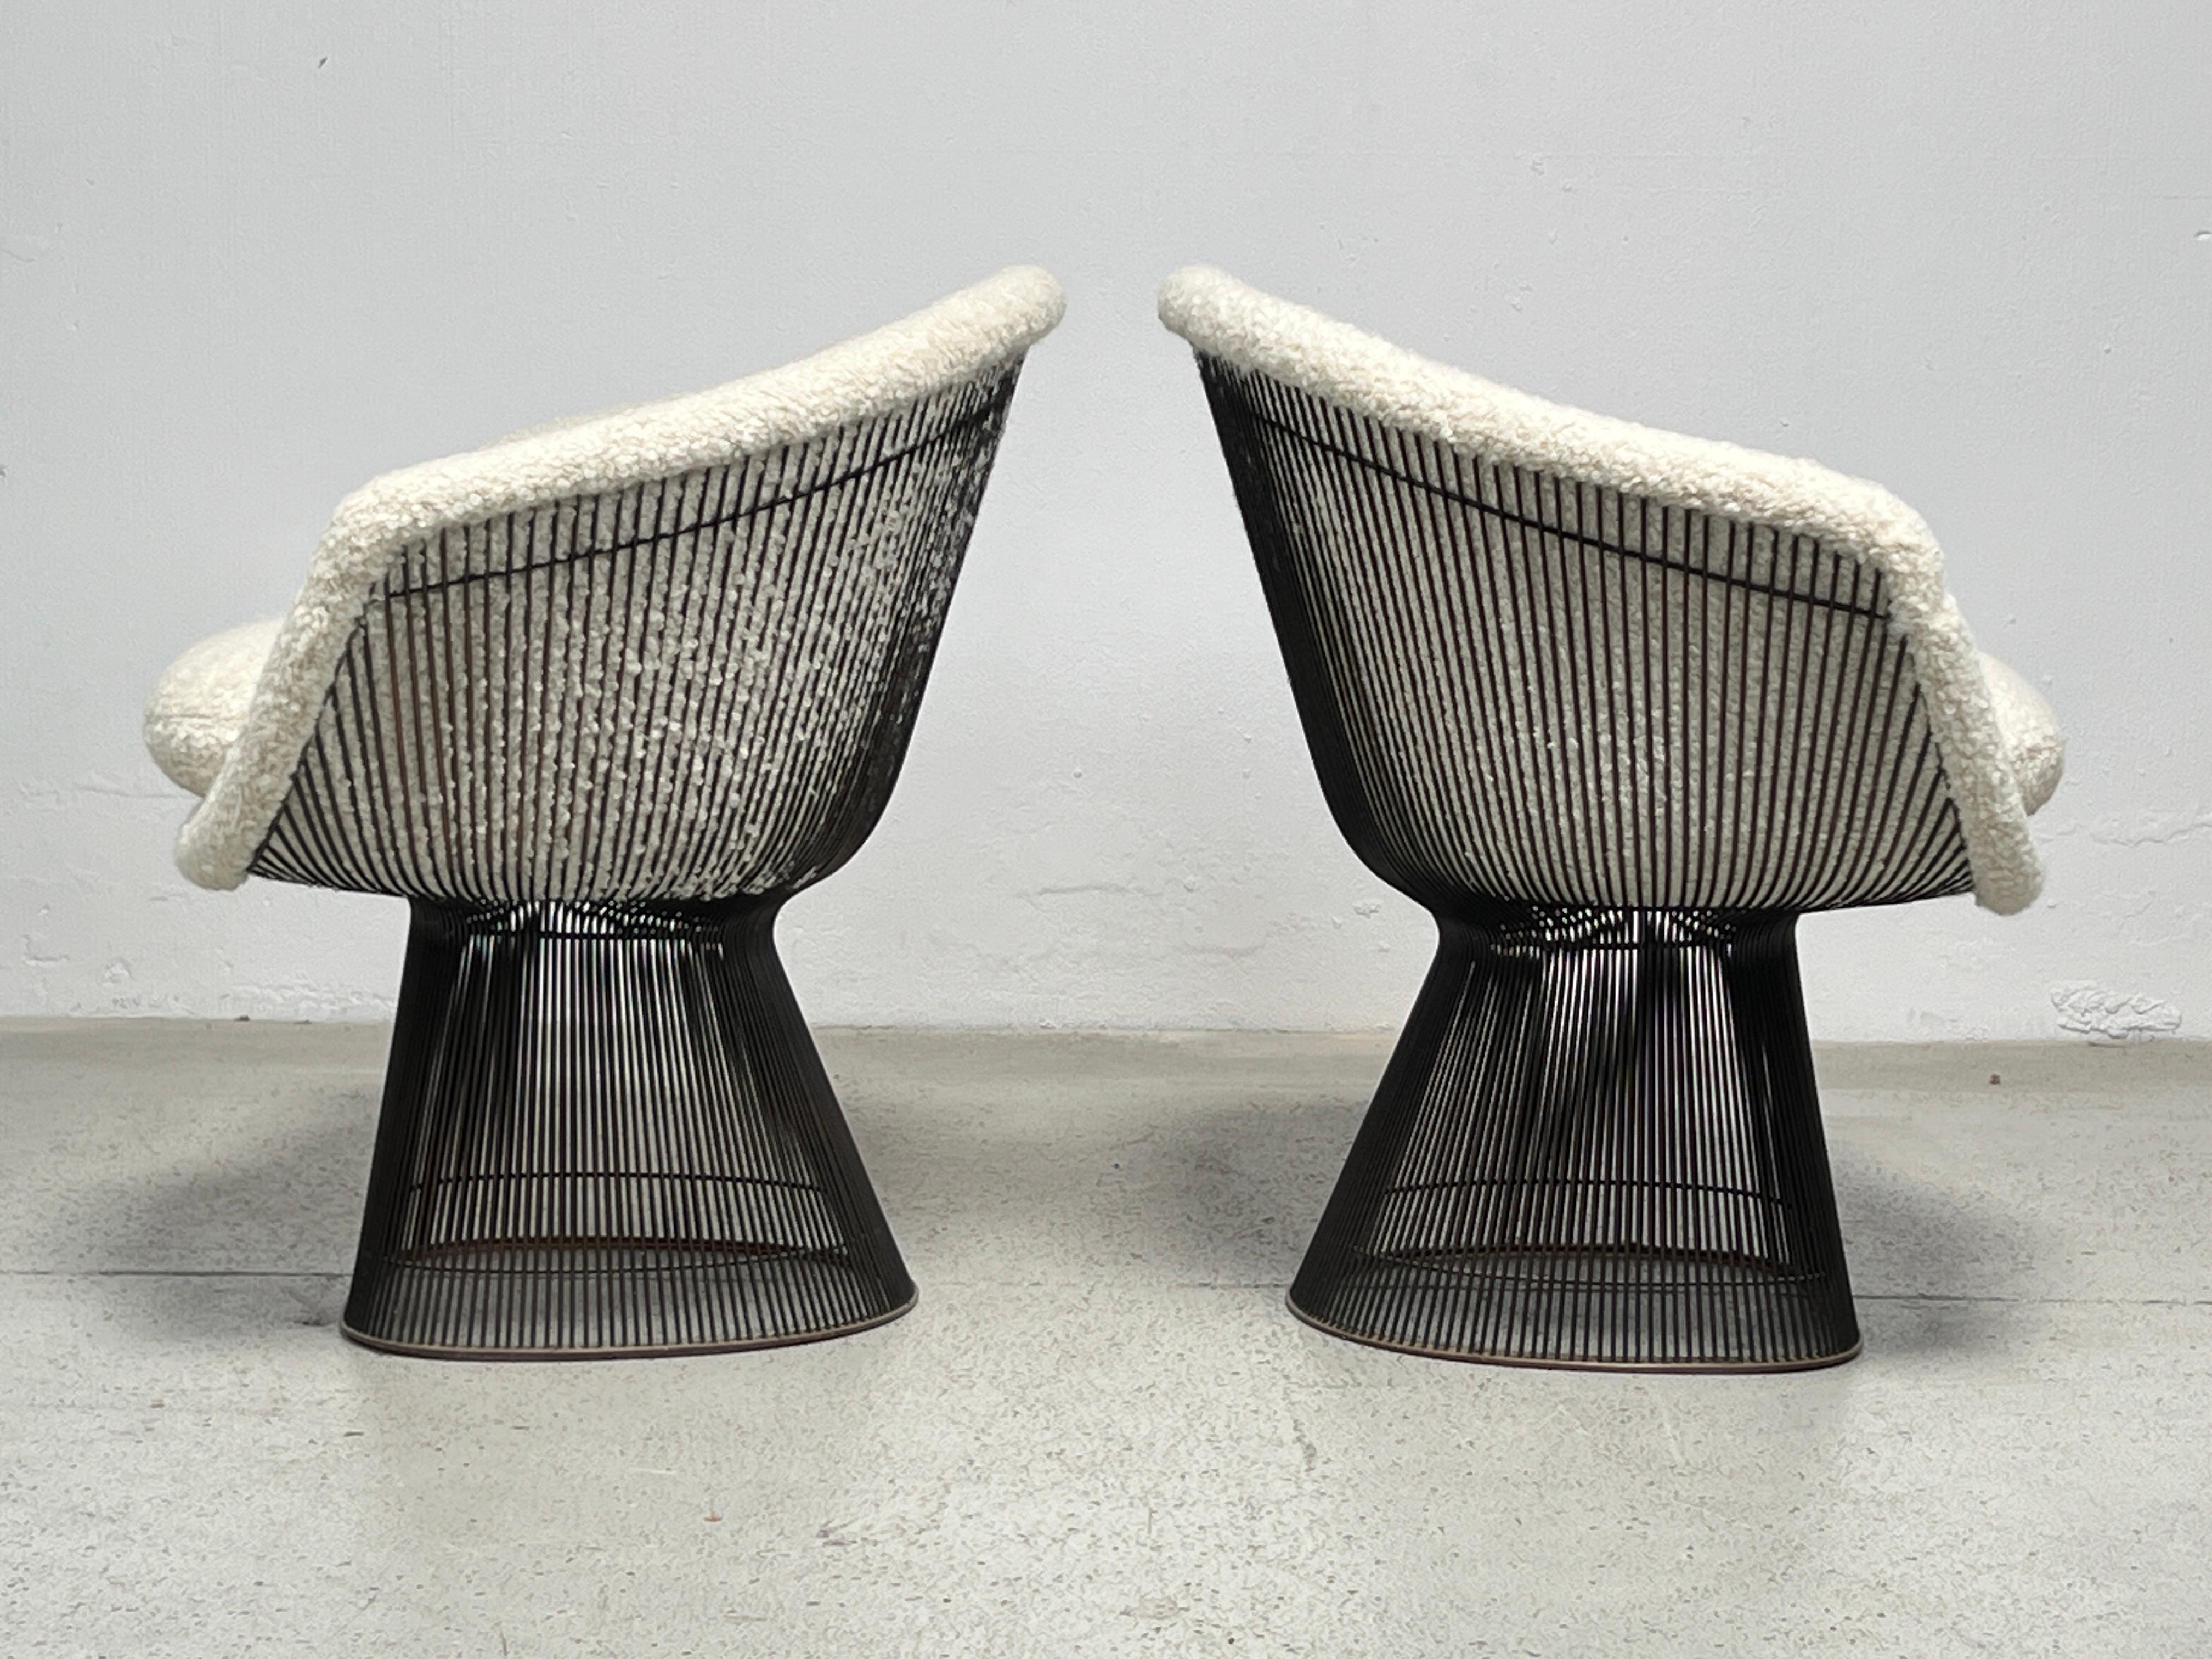 Late 20th Century Pair of Bronze Warren Platner Lounge Chairs for Knoll